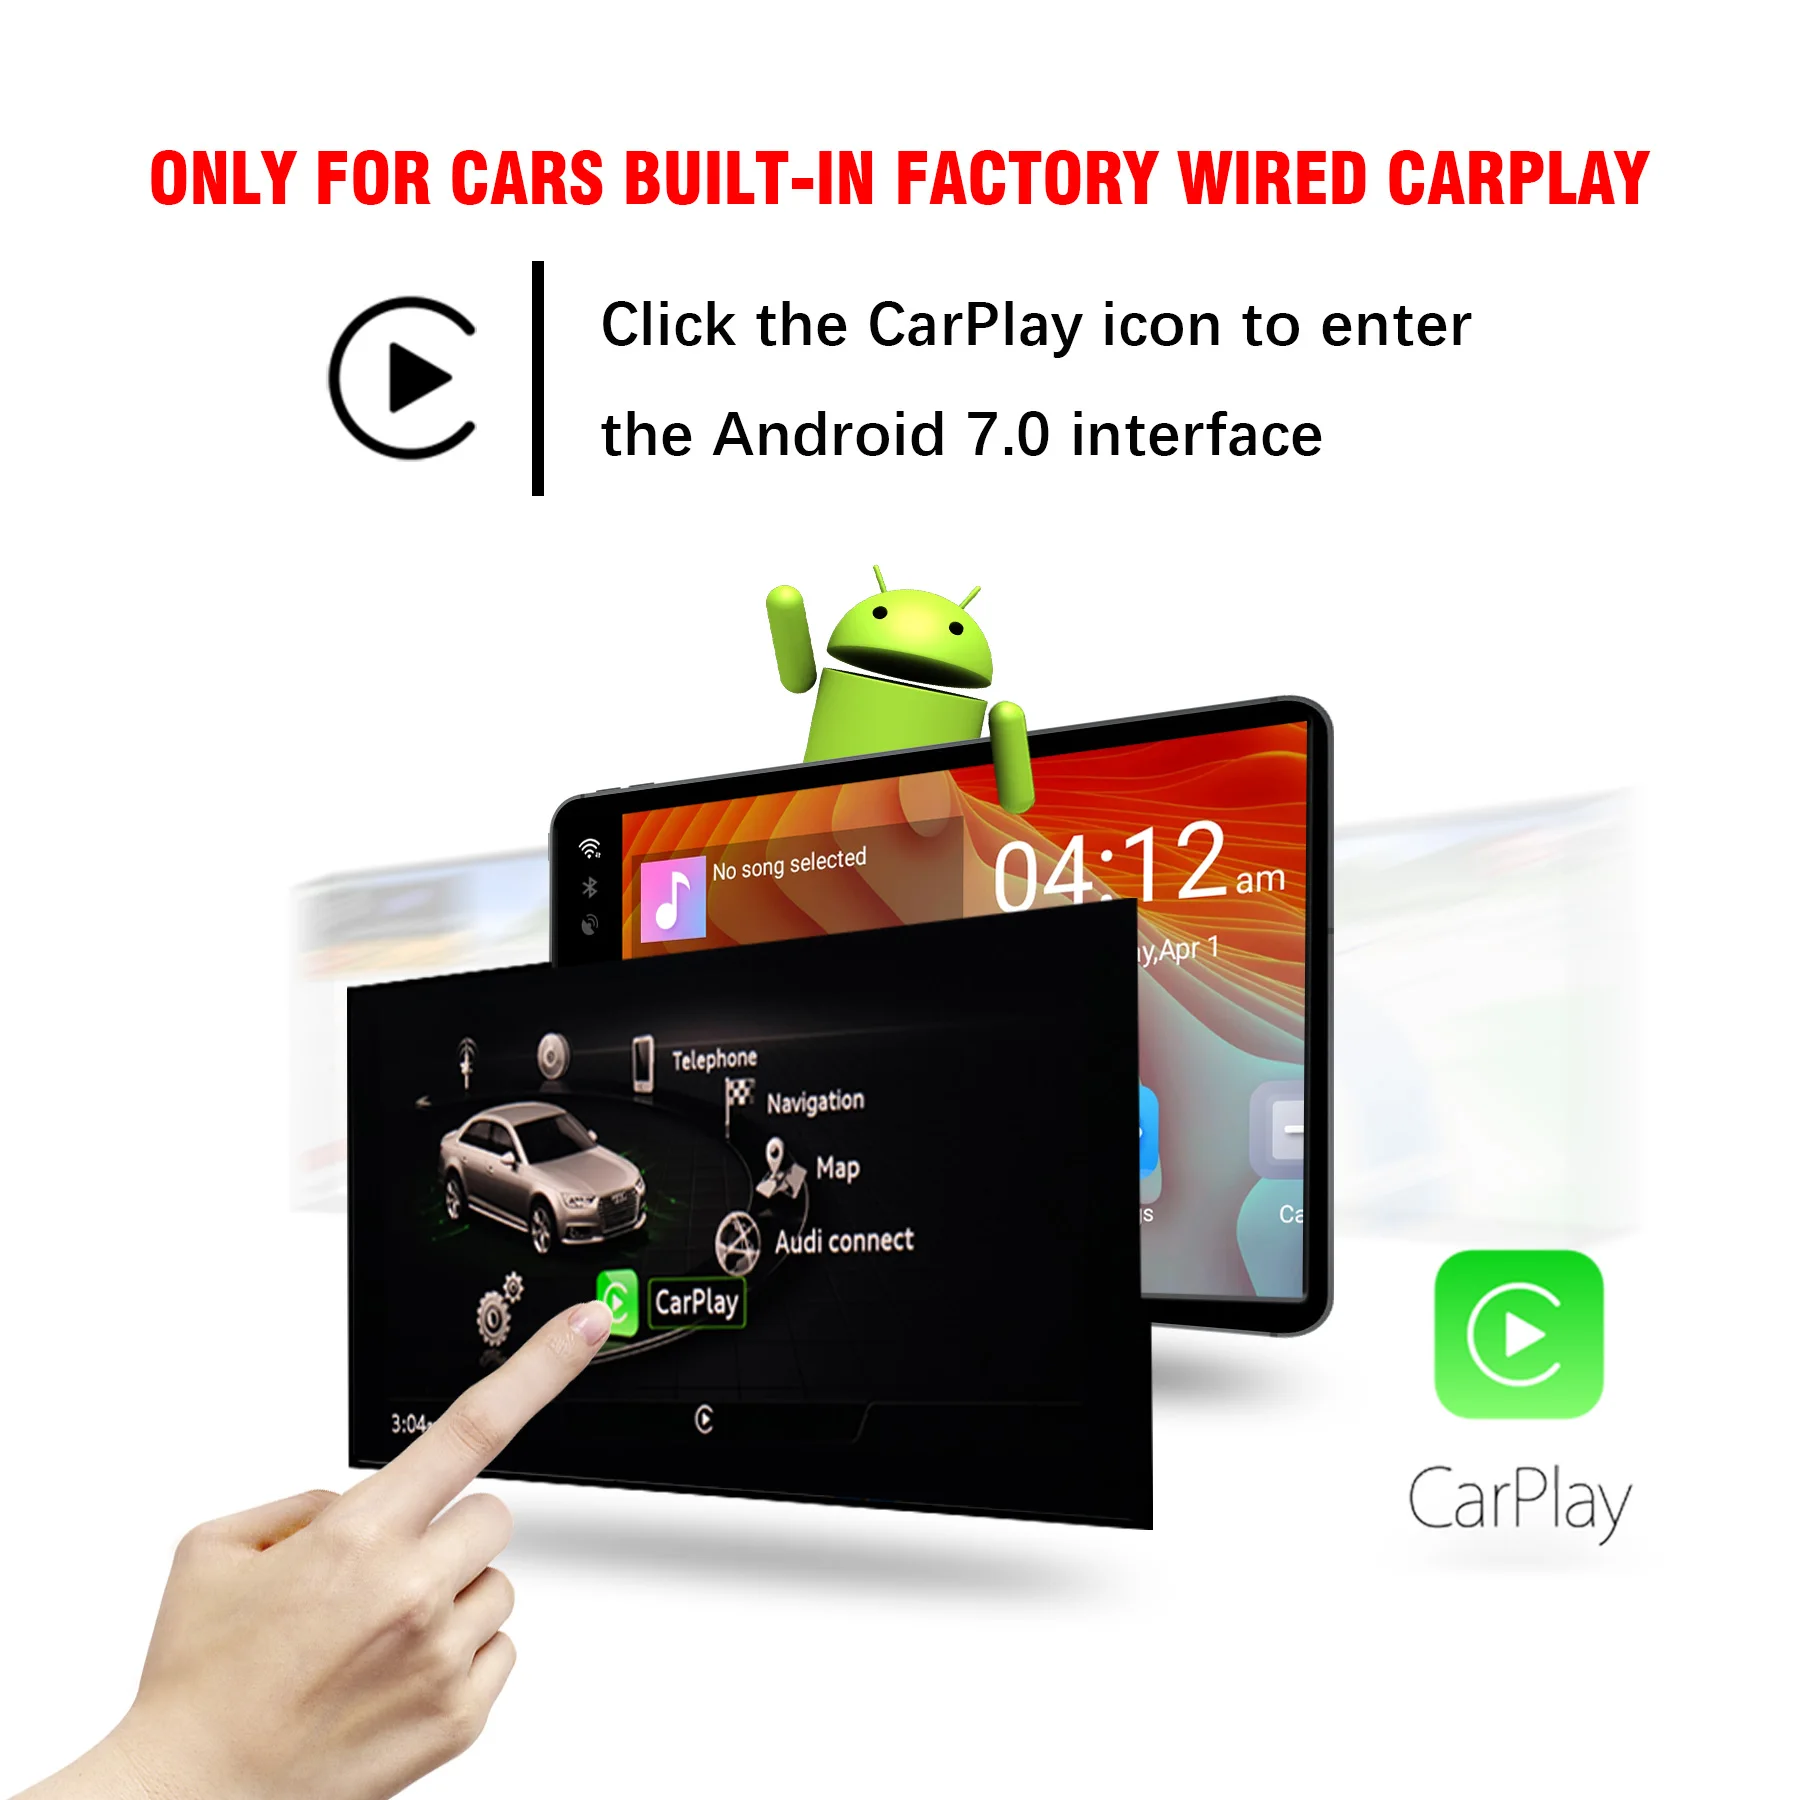 Multimedia AI Box for Factory Wired Apple Carplay Cars 2016-2020 OTTOCAST Wireless Carplay Adapter U2-SMART Plug & Play Support Google Play Apps Download Youtube Netfilx Mirroring Online GPS